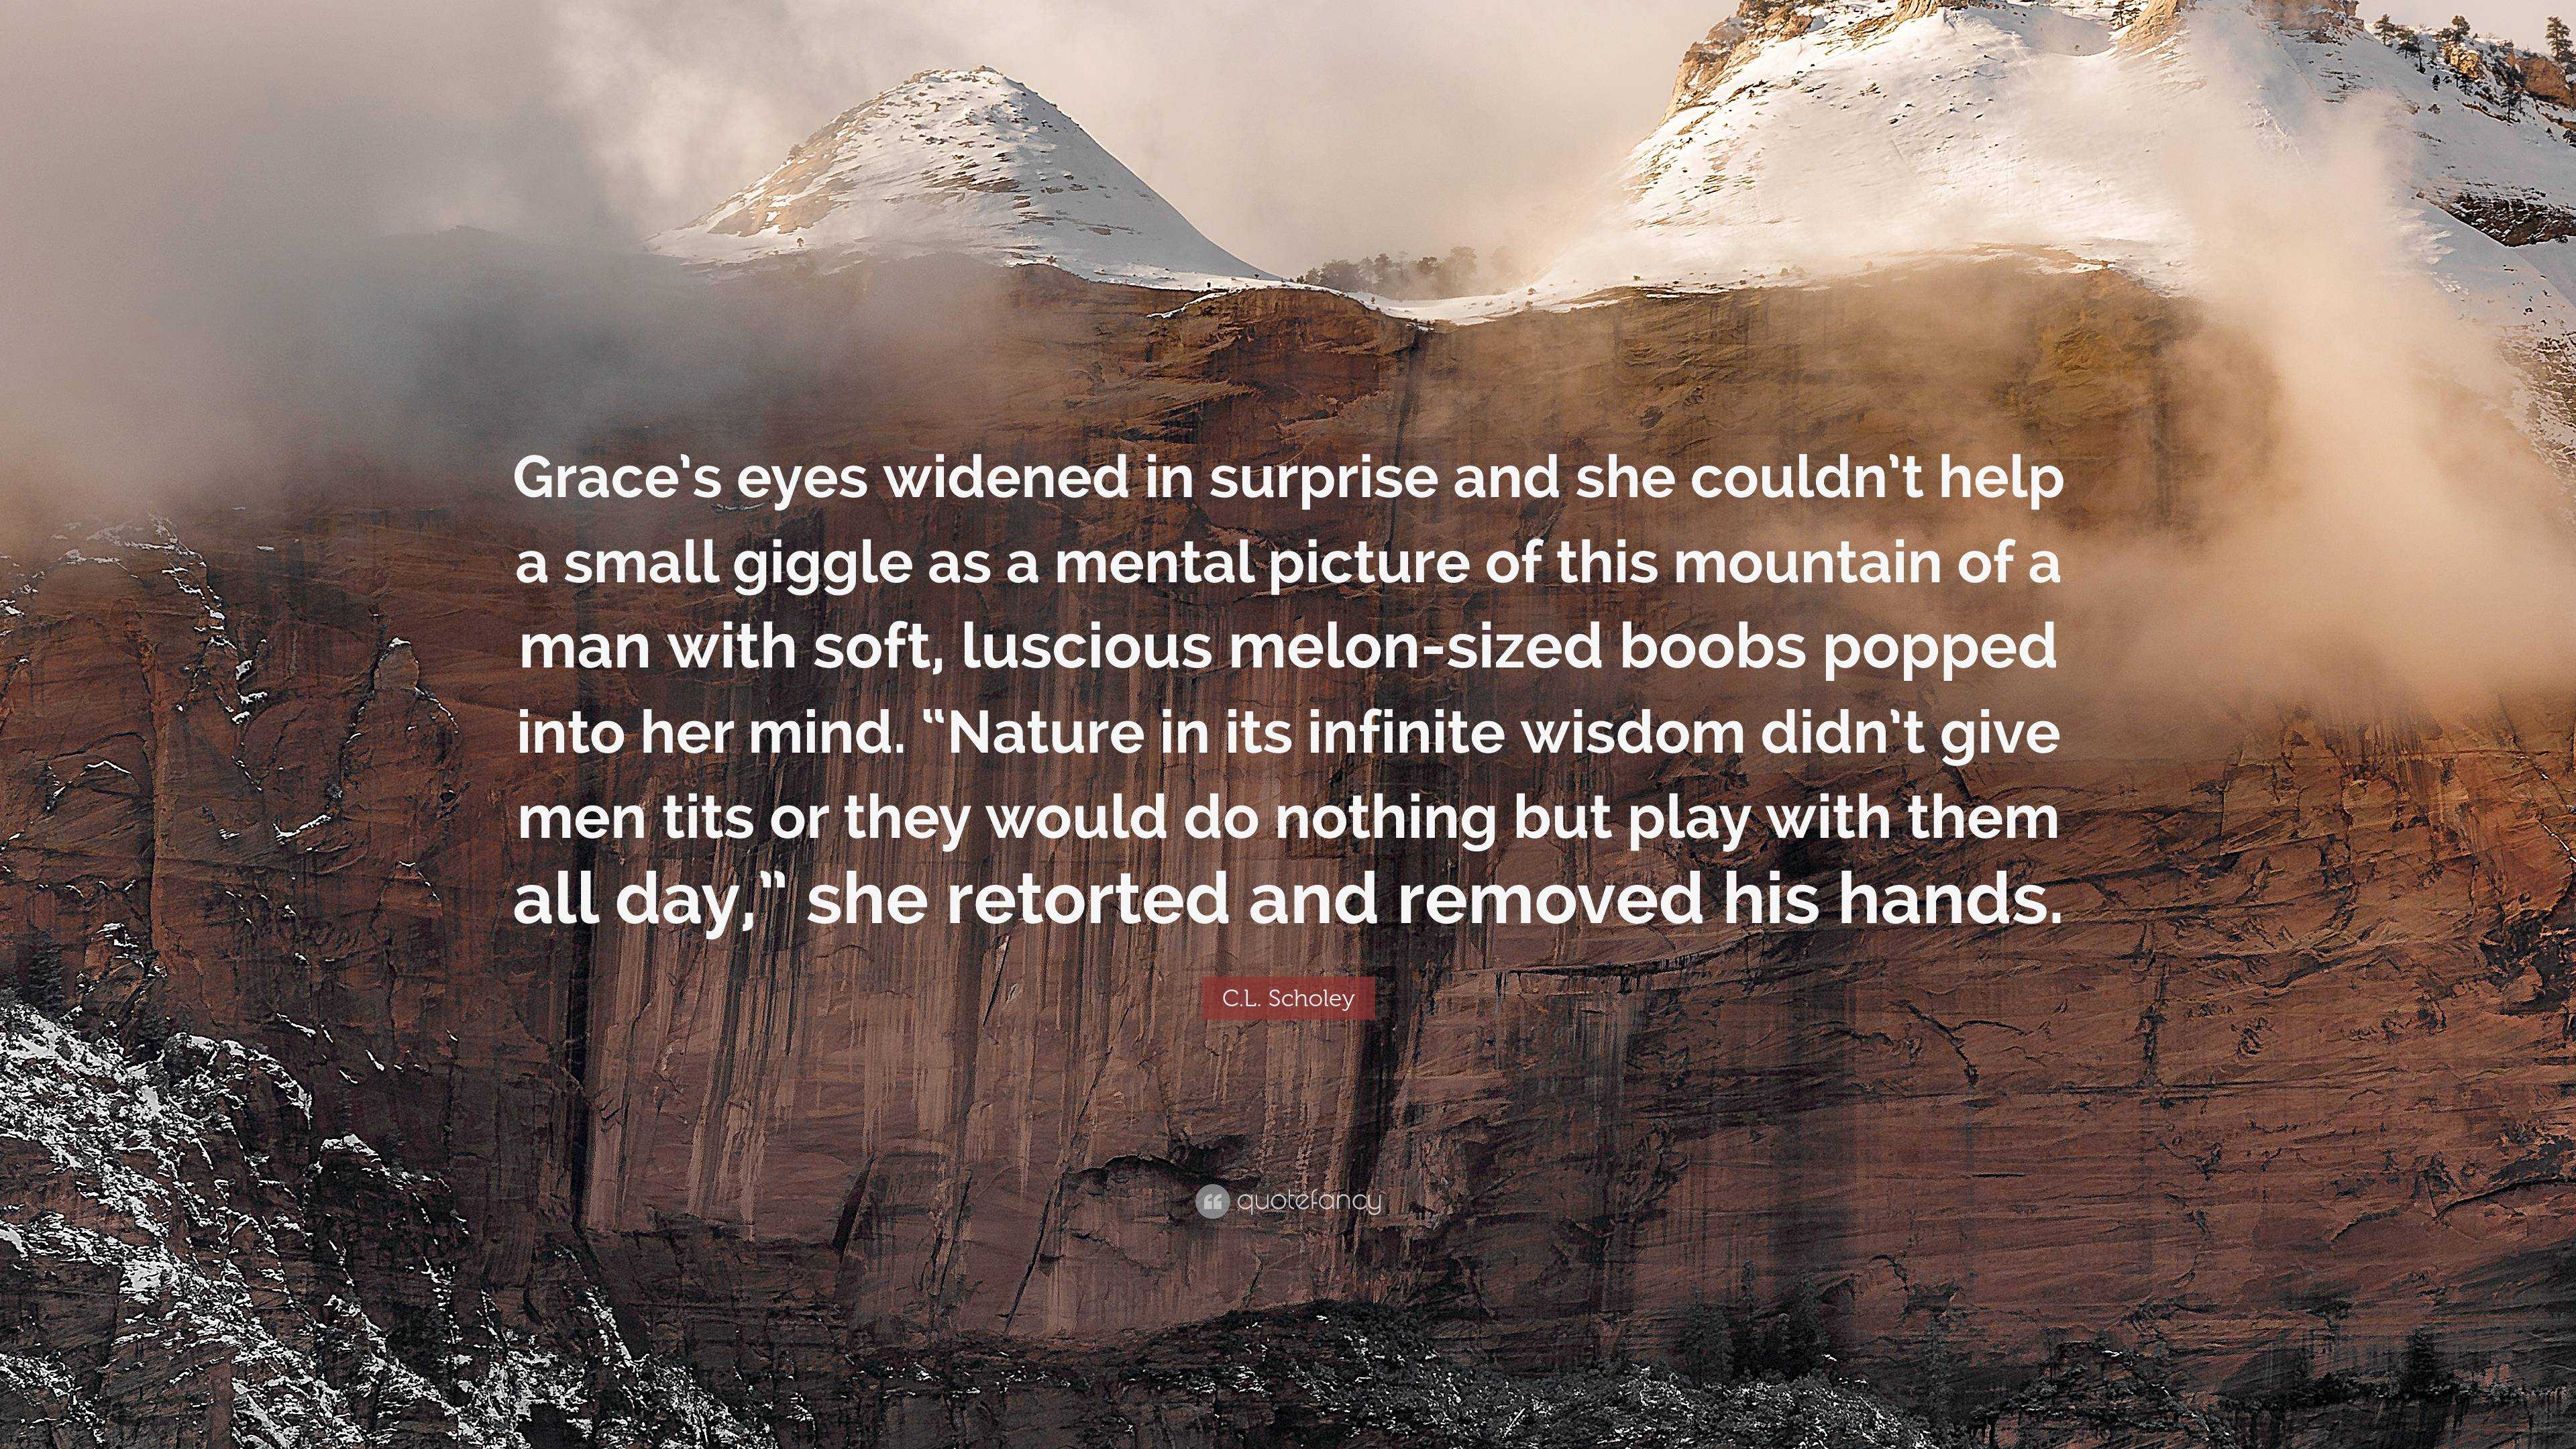 https://quotefancy.com/media/wallpaper/3840x2160/6874022-C-L-Scholey-Quote-Grace-s-eyes-widened-in-surprise-and-she-couldn.jpg